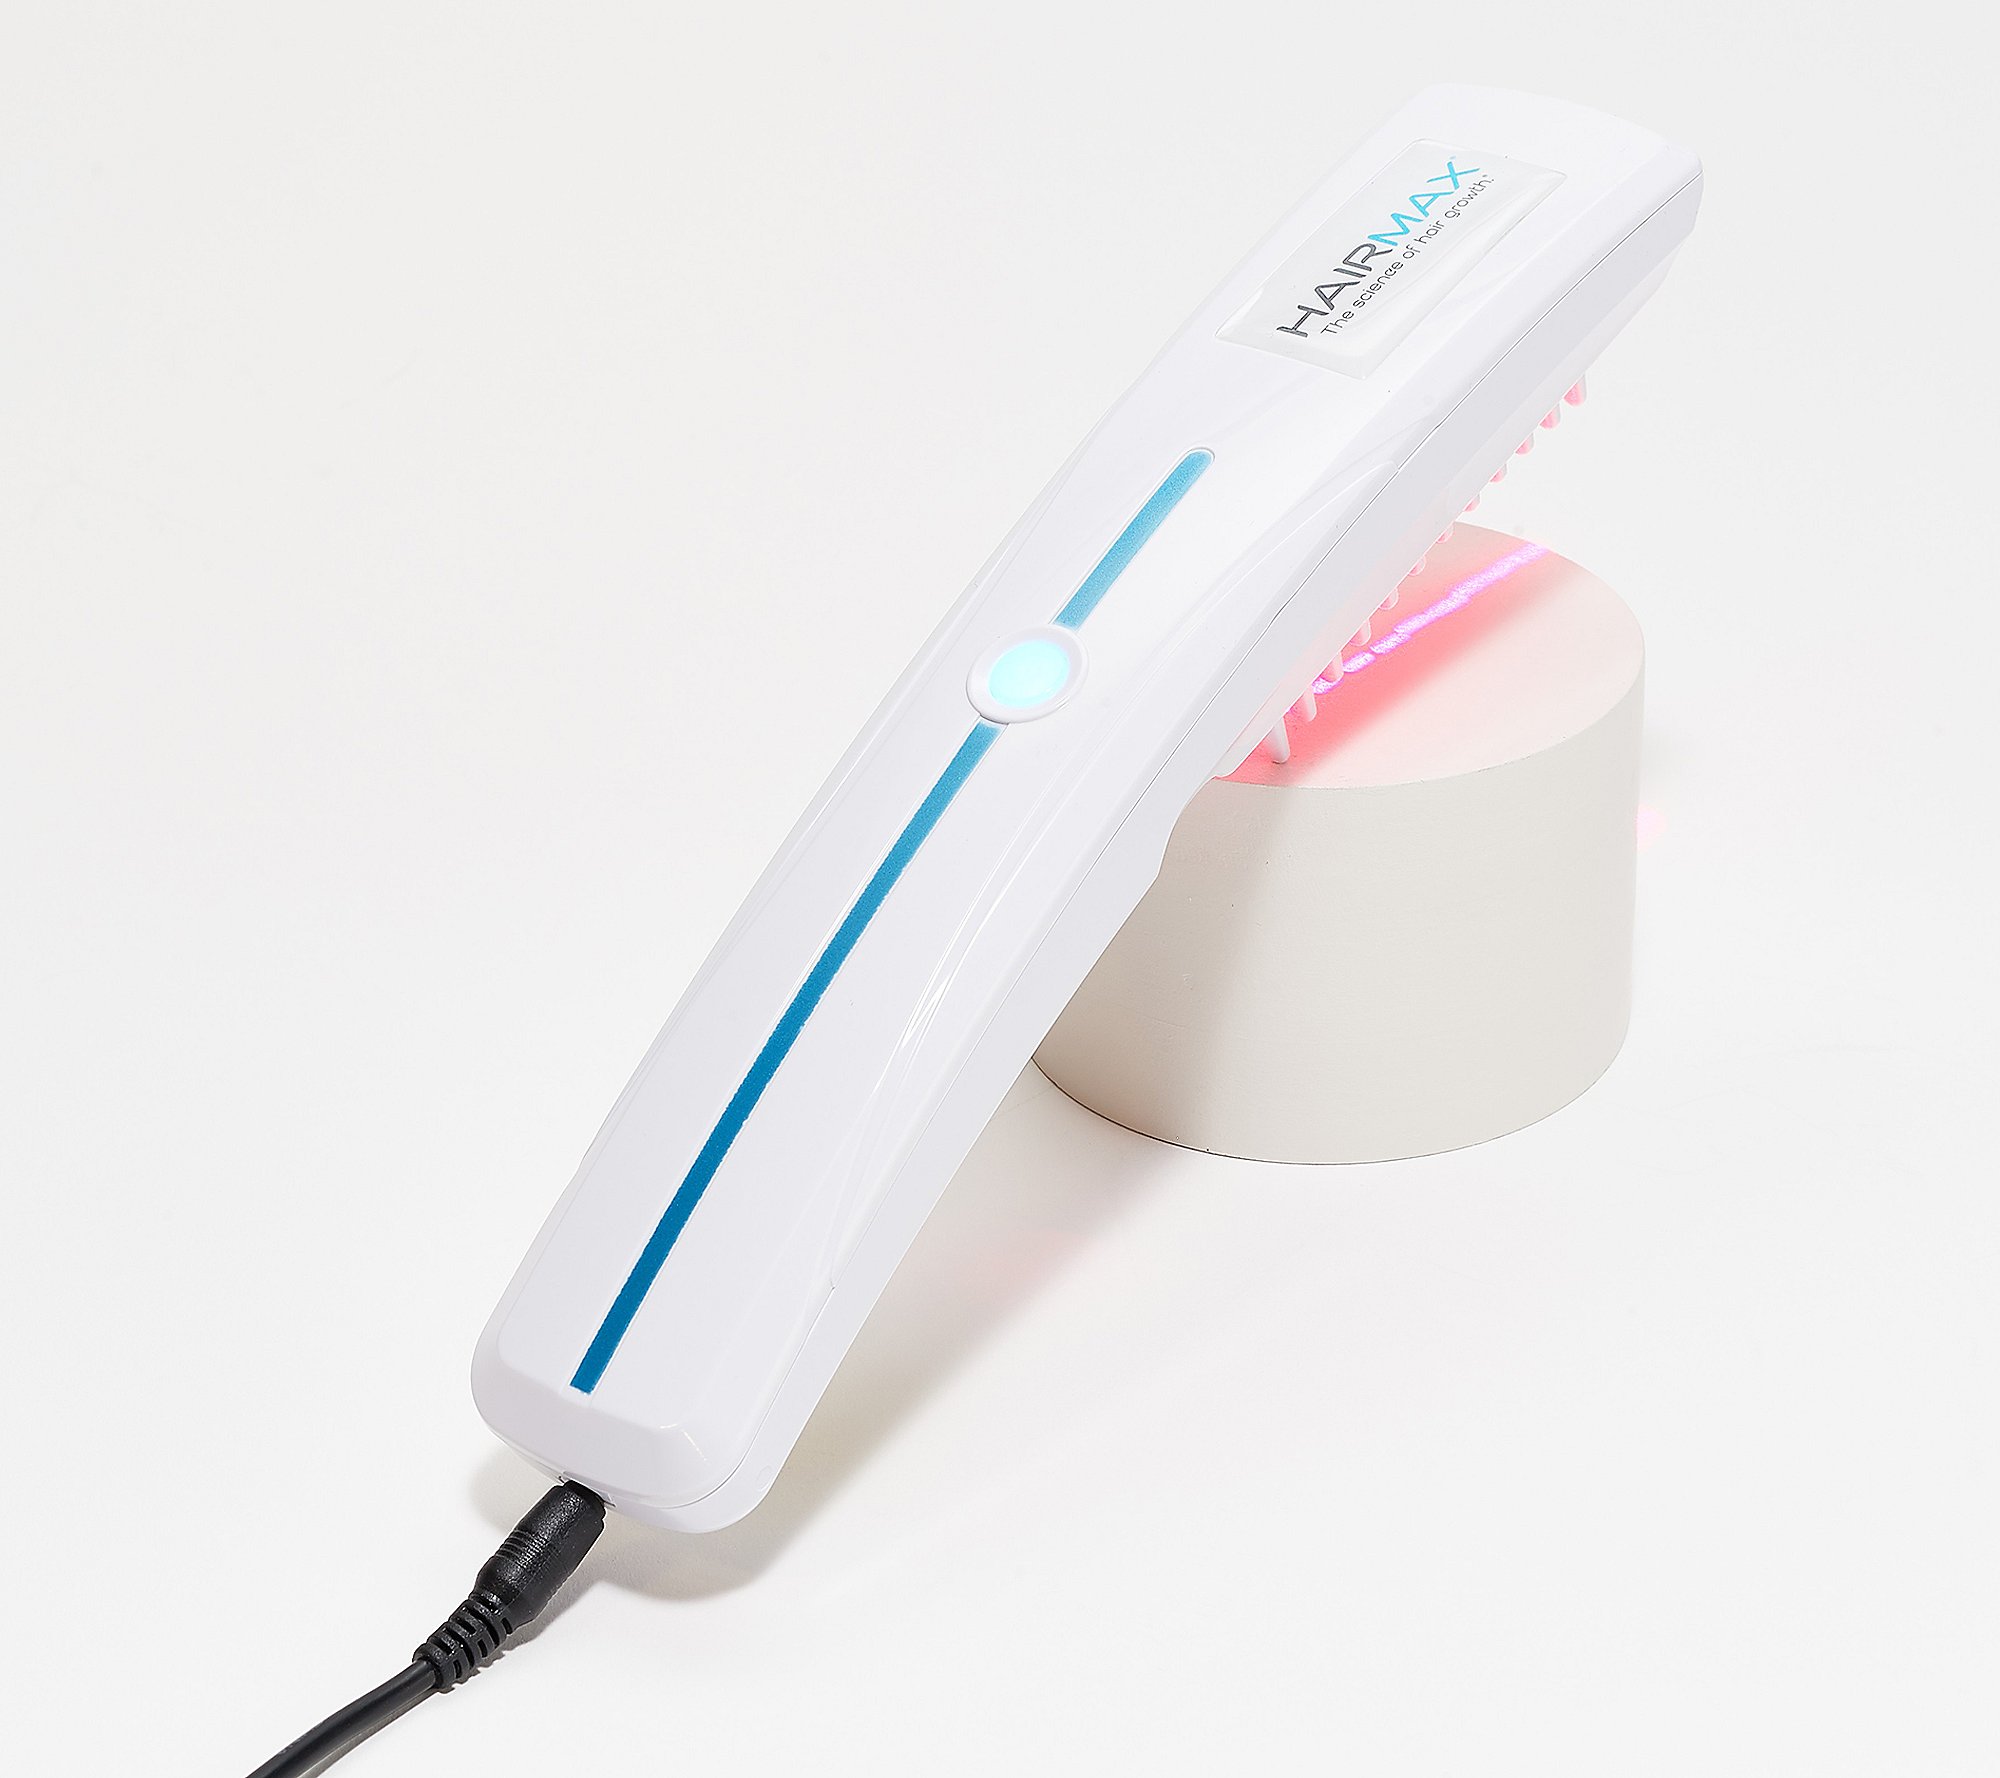 HairMax Pro 12 Hair Growth LaserComb Device (3 Colors Available)